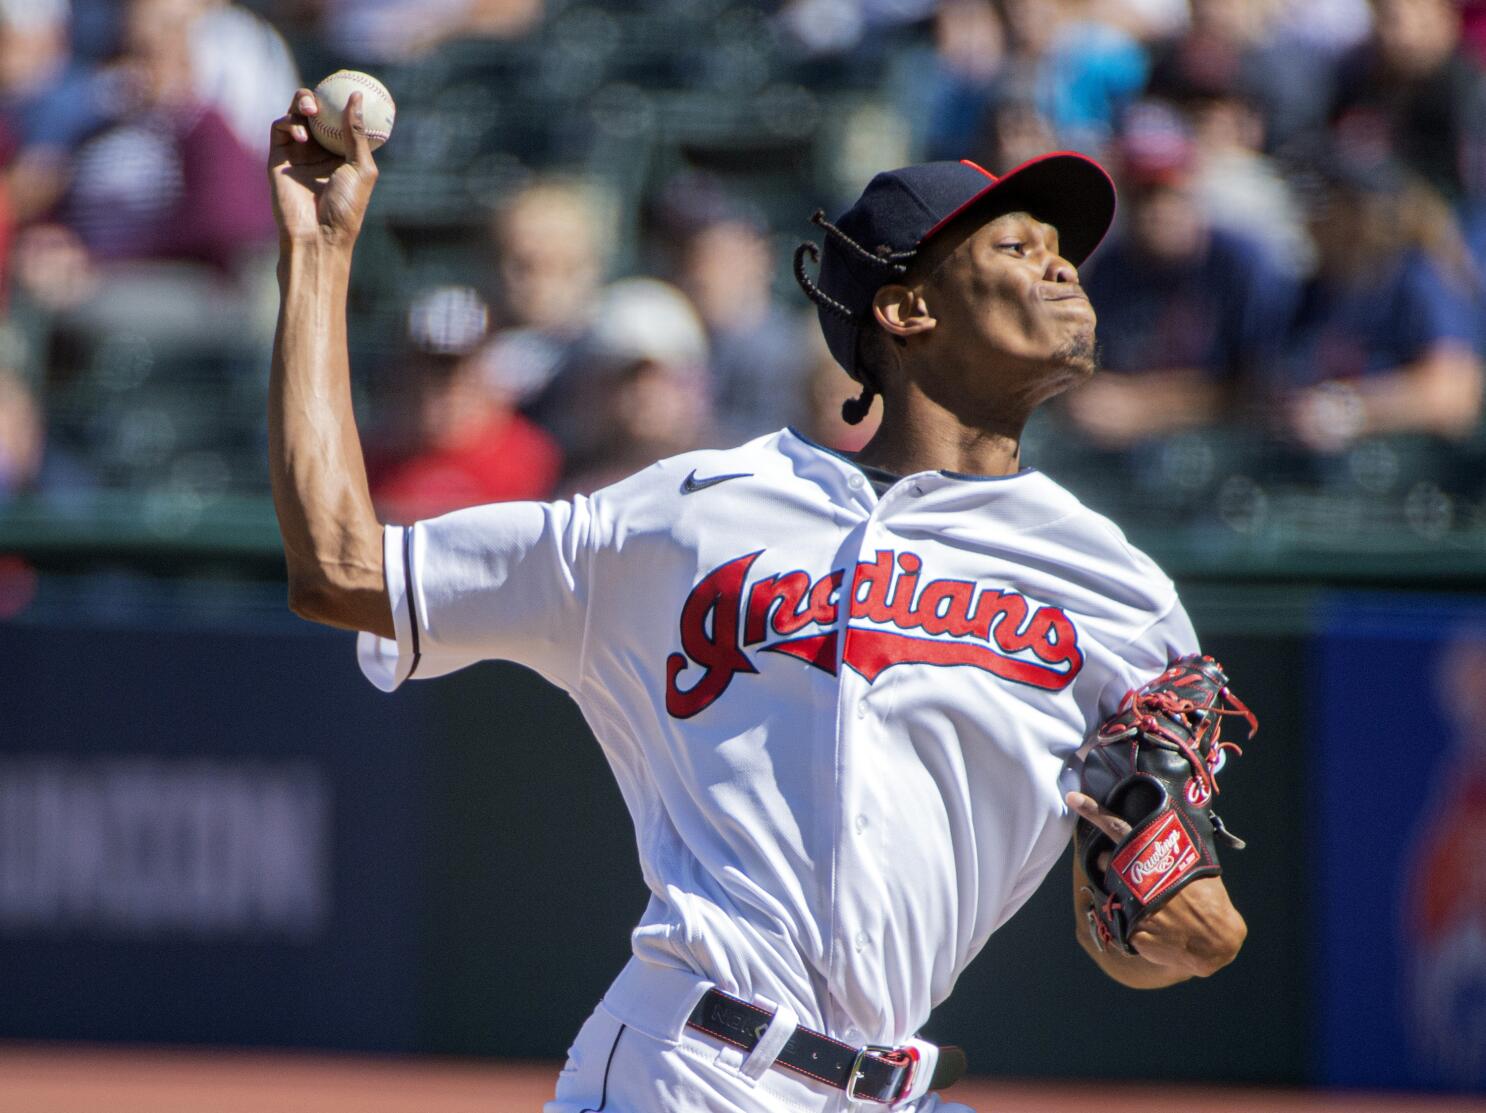 Cleveland baseball team to drop 'Indians' nickname - Sports